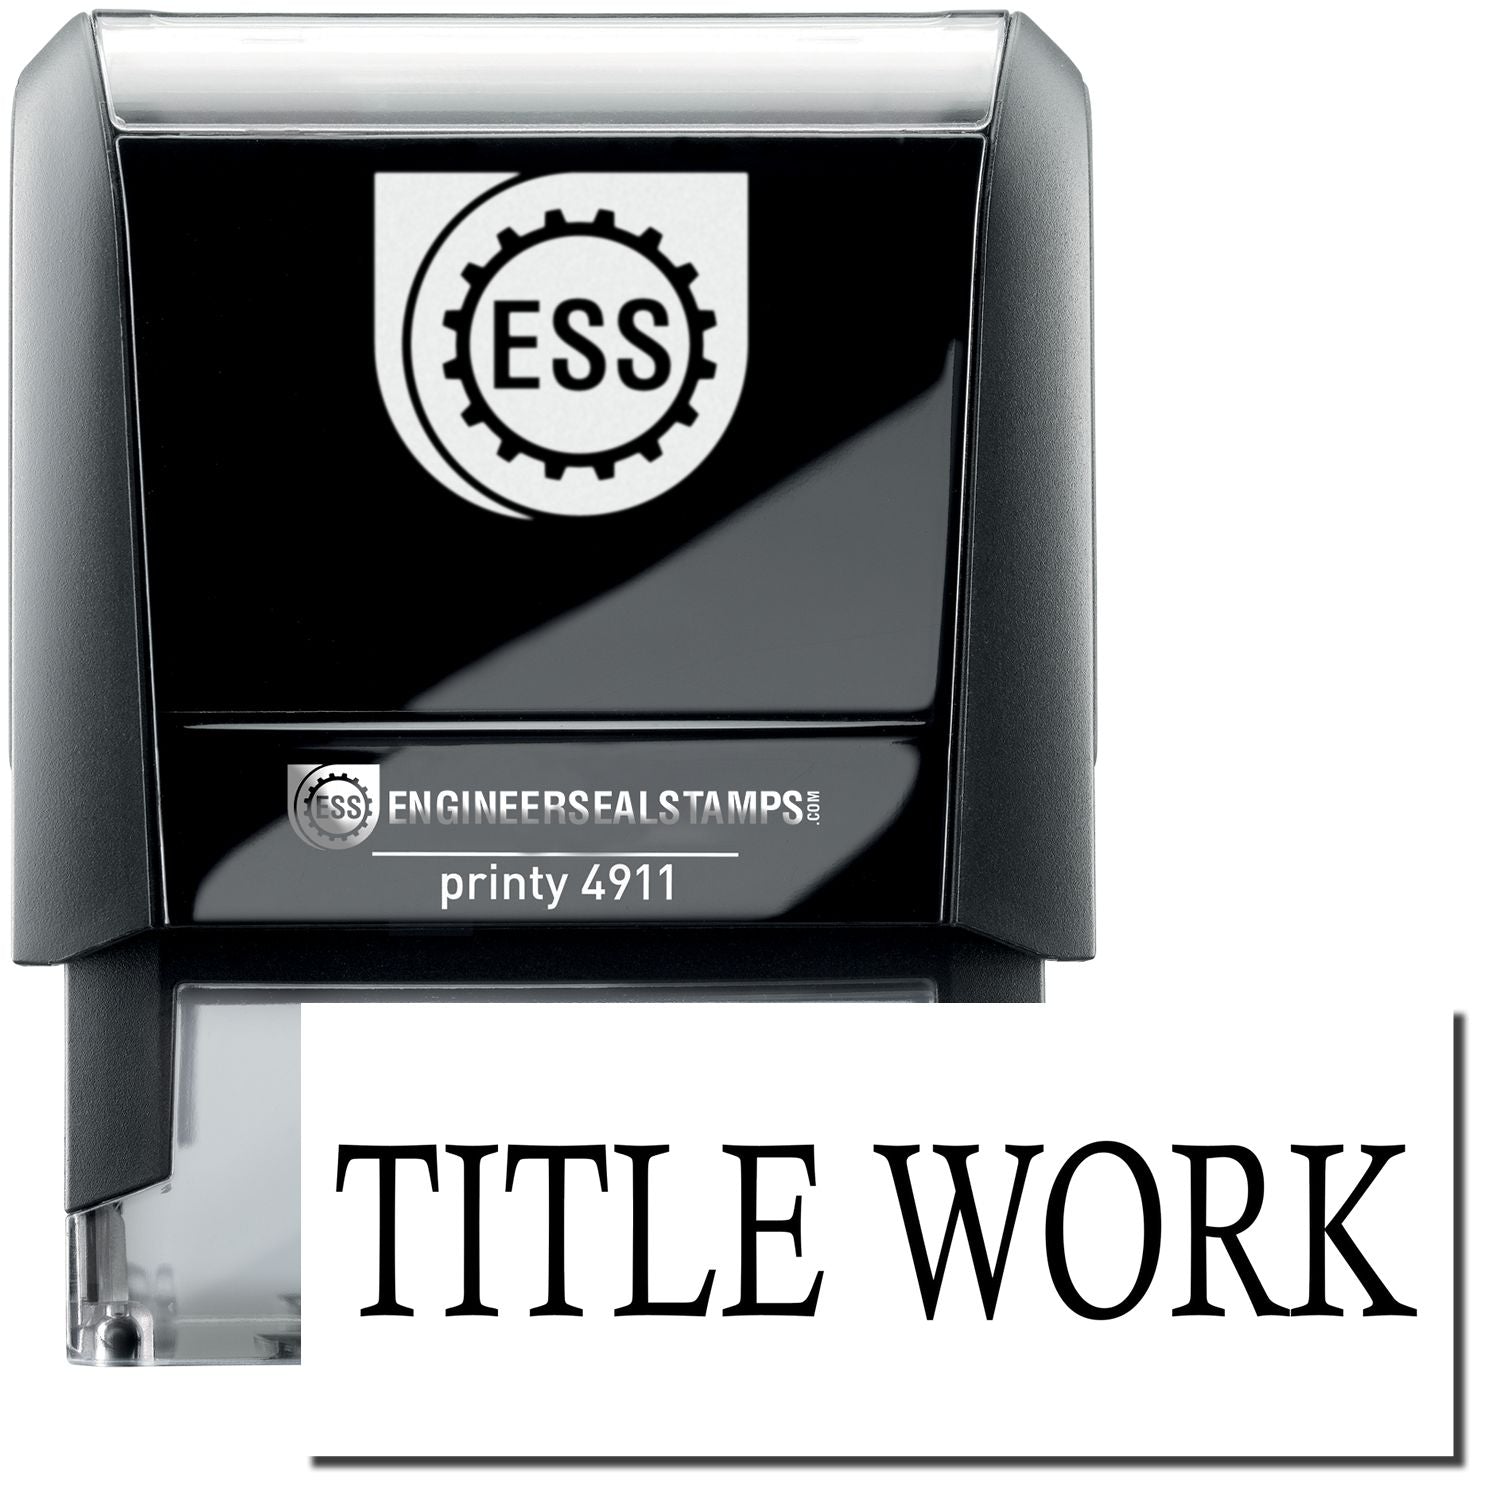 A self-inking stamp with a stamped image showing how the text "TITLE WORK" is displayed after stamping.